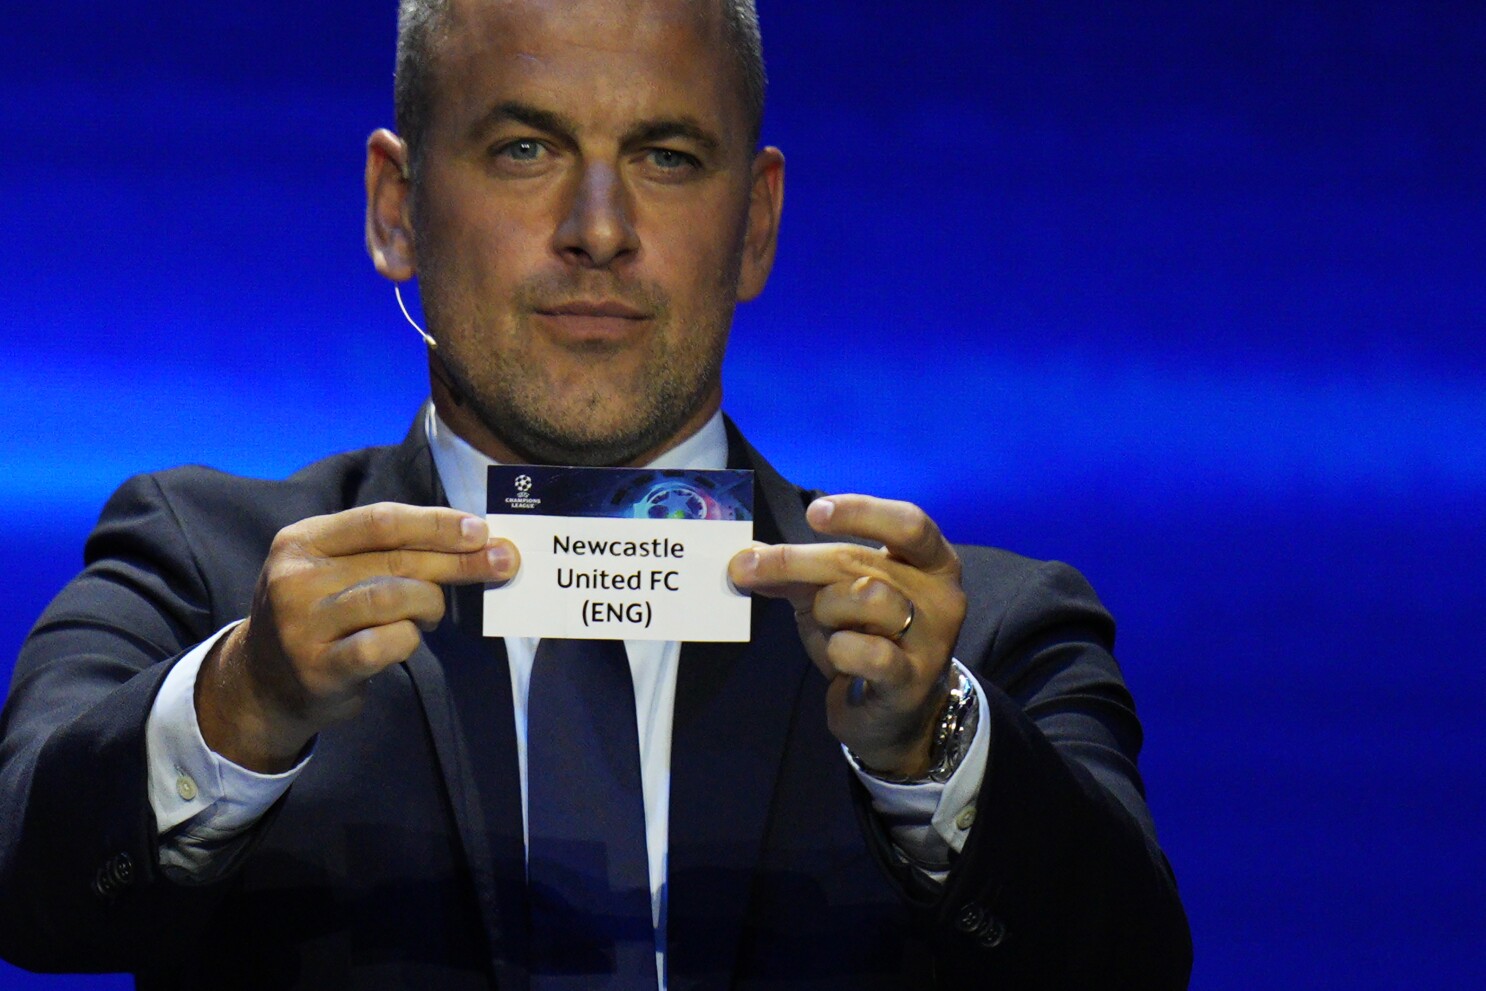 Champions League group stage draw made in Monaco, UEFA Champions League